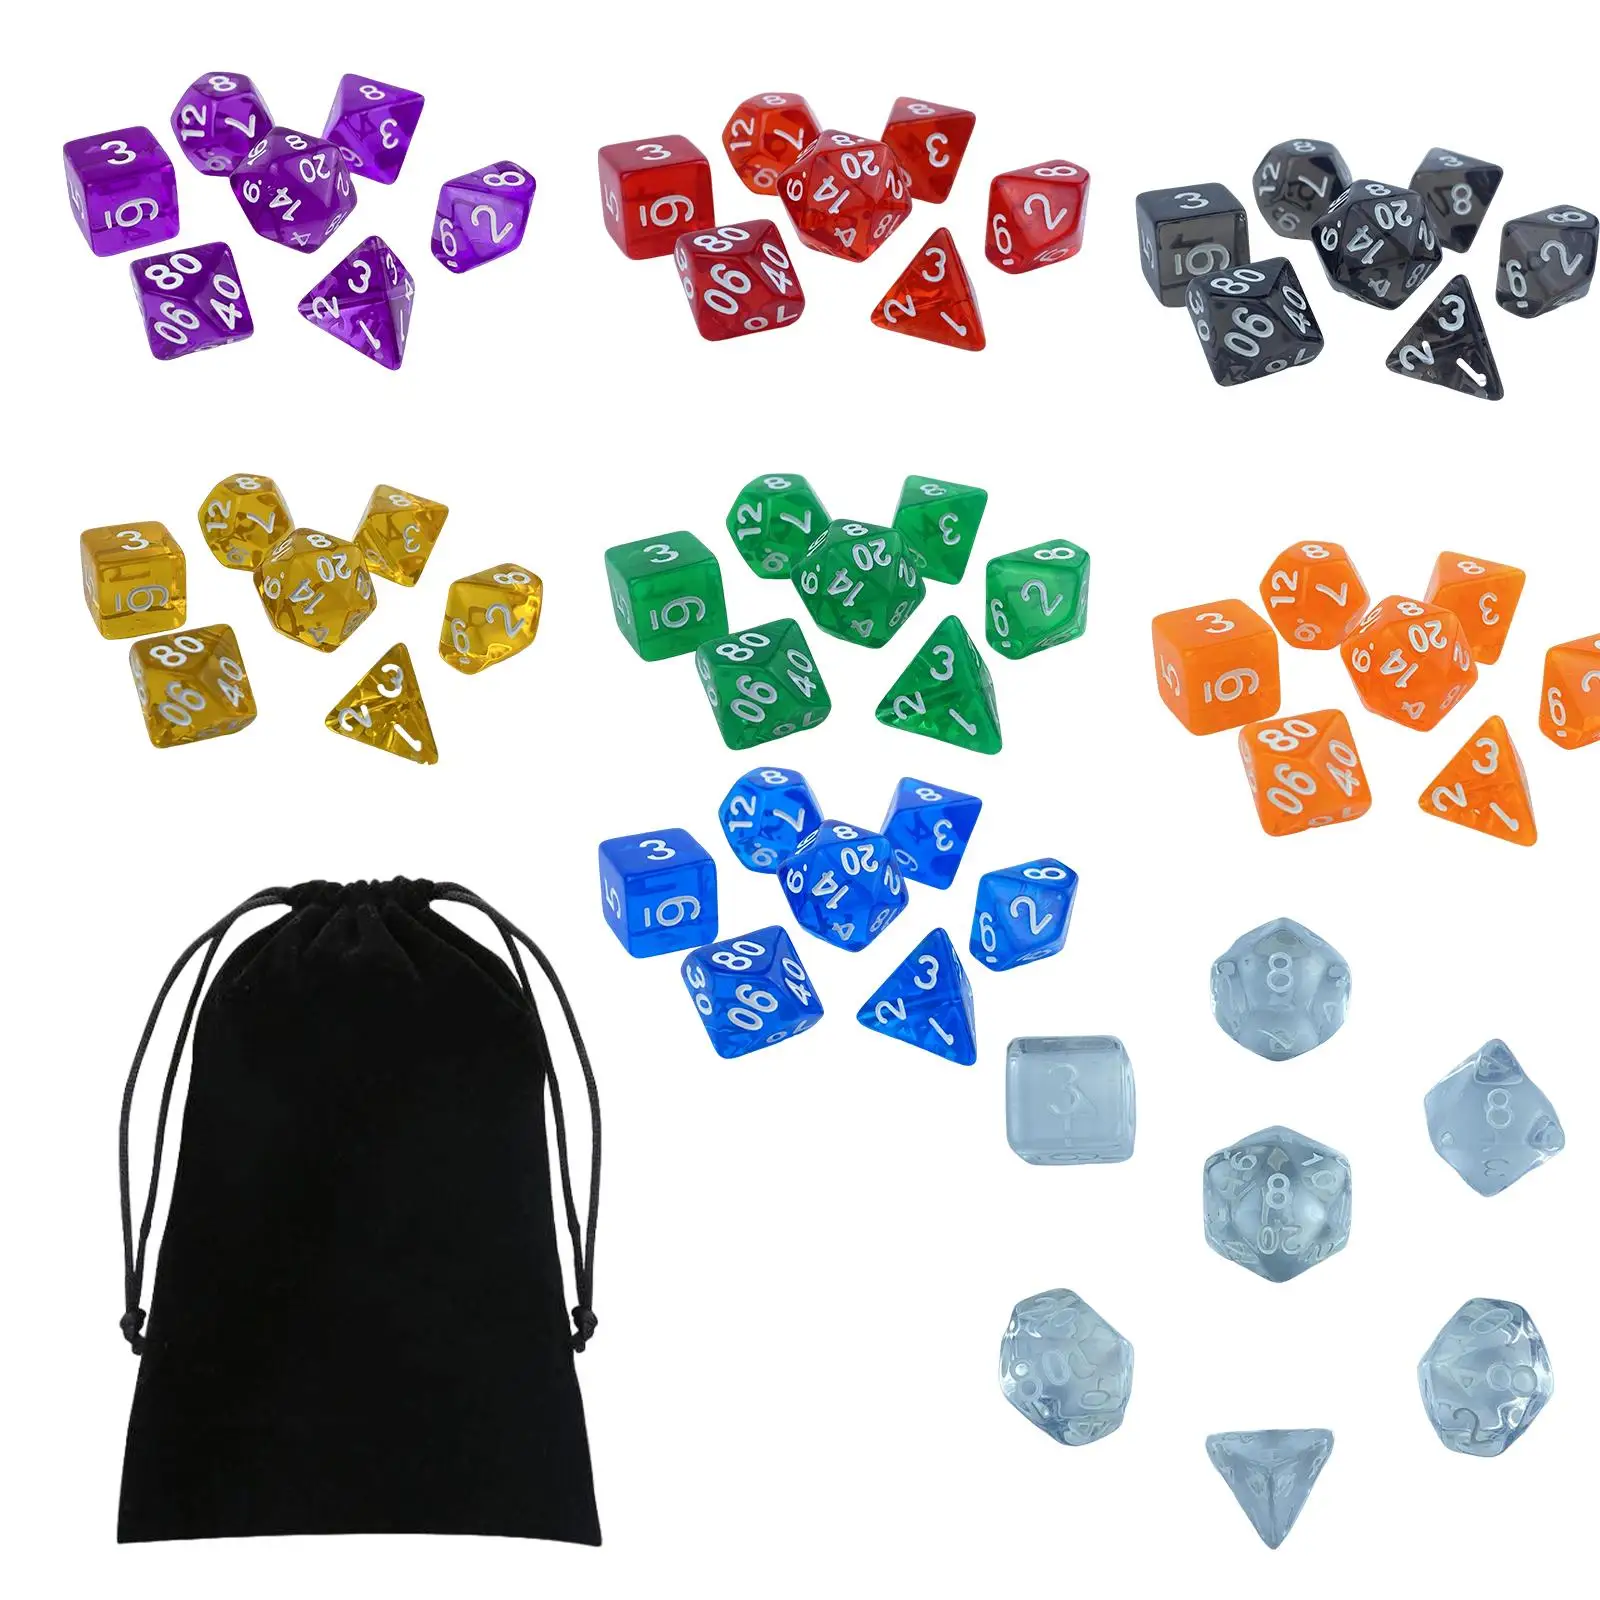 Polyhedral Dice, Multi Sided Dice Set 56pcs Polyhedral RPG Game Dices, Purple, Red, Black, Yellow, Green, Orange, Blue, Silver